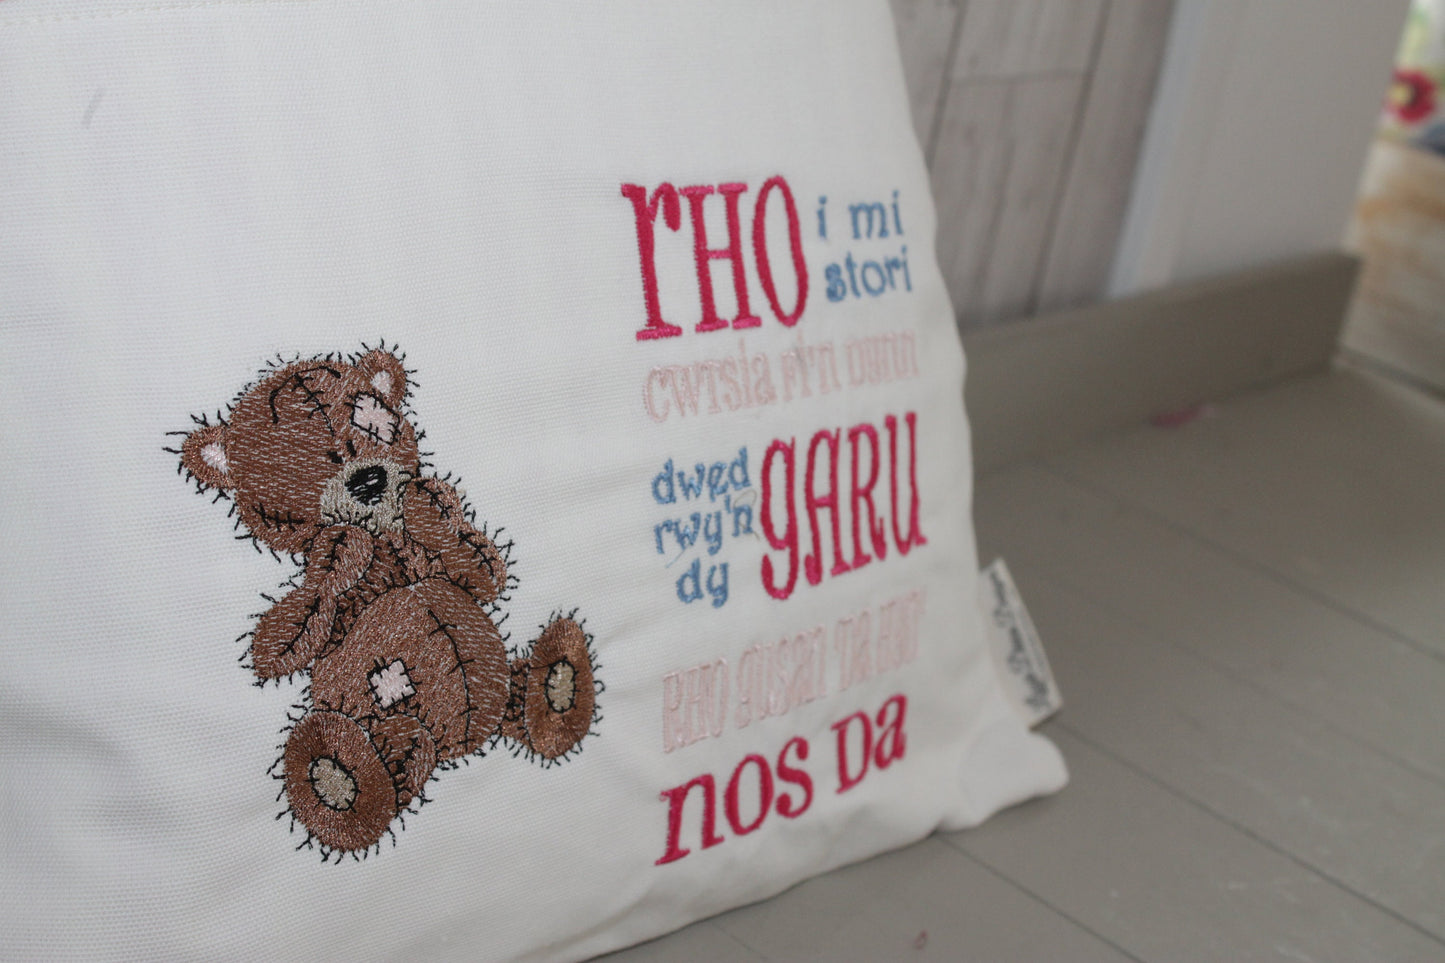 Book Cushion-Children's Reading Pillow~Personalised Cushion with Pocket-Welsh Book Cushion - Pink Tatty Teddy-Welsh saying